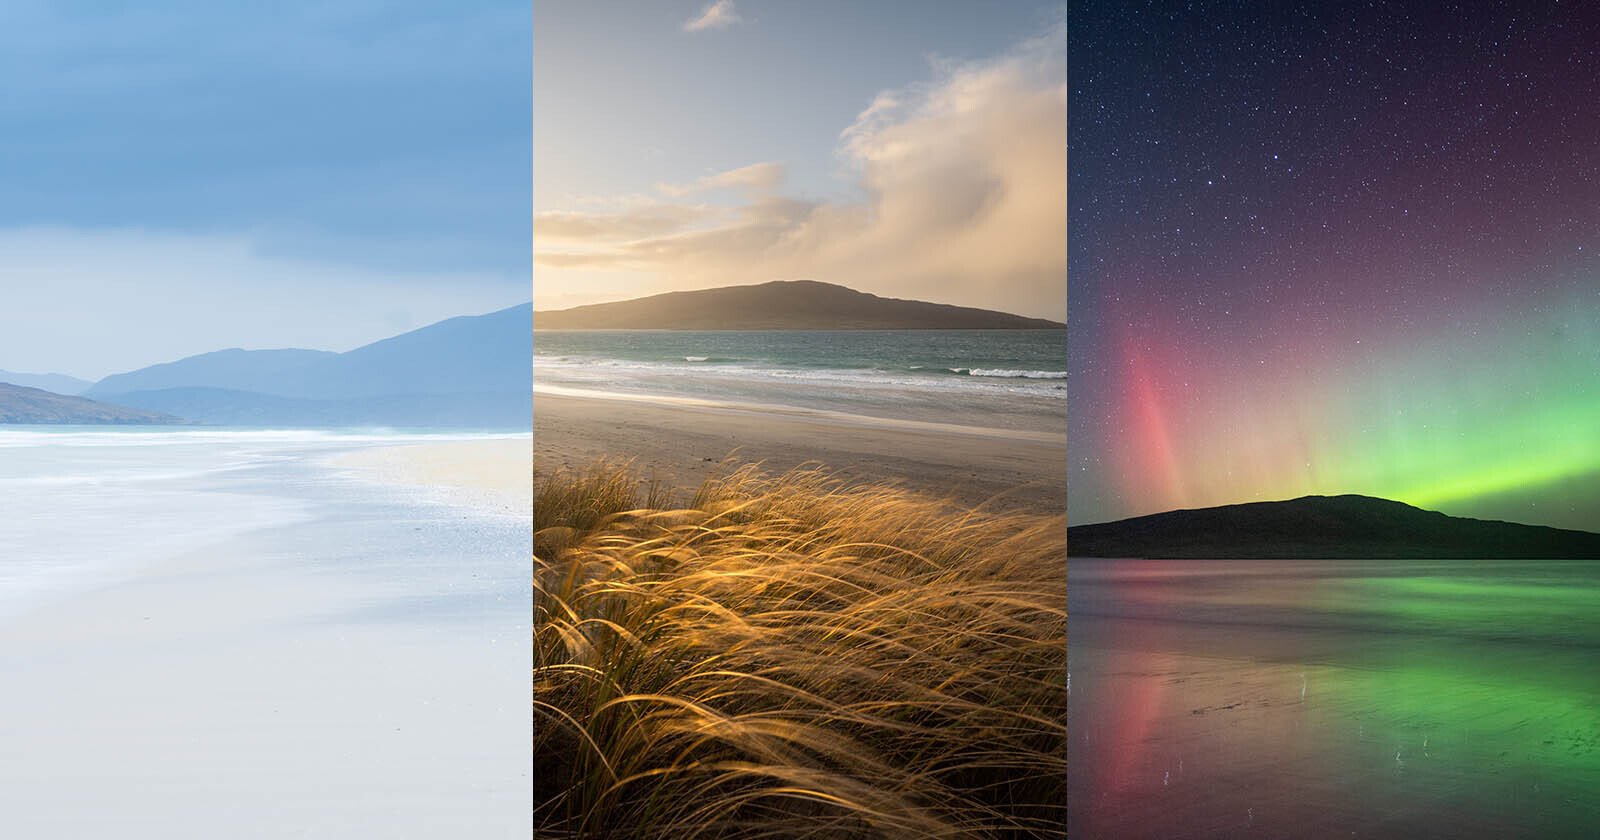 Why I Spent 30 Days Photographing the Same Beach